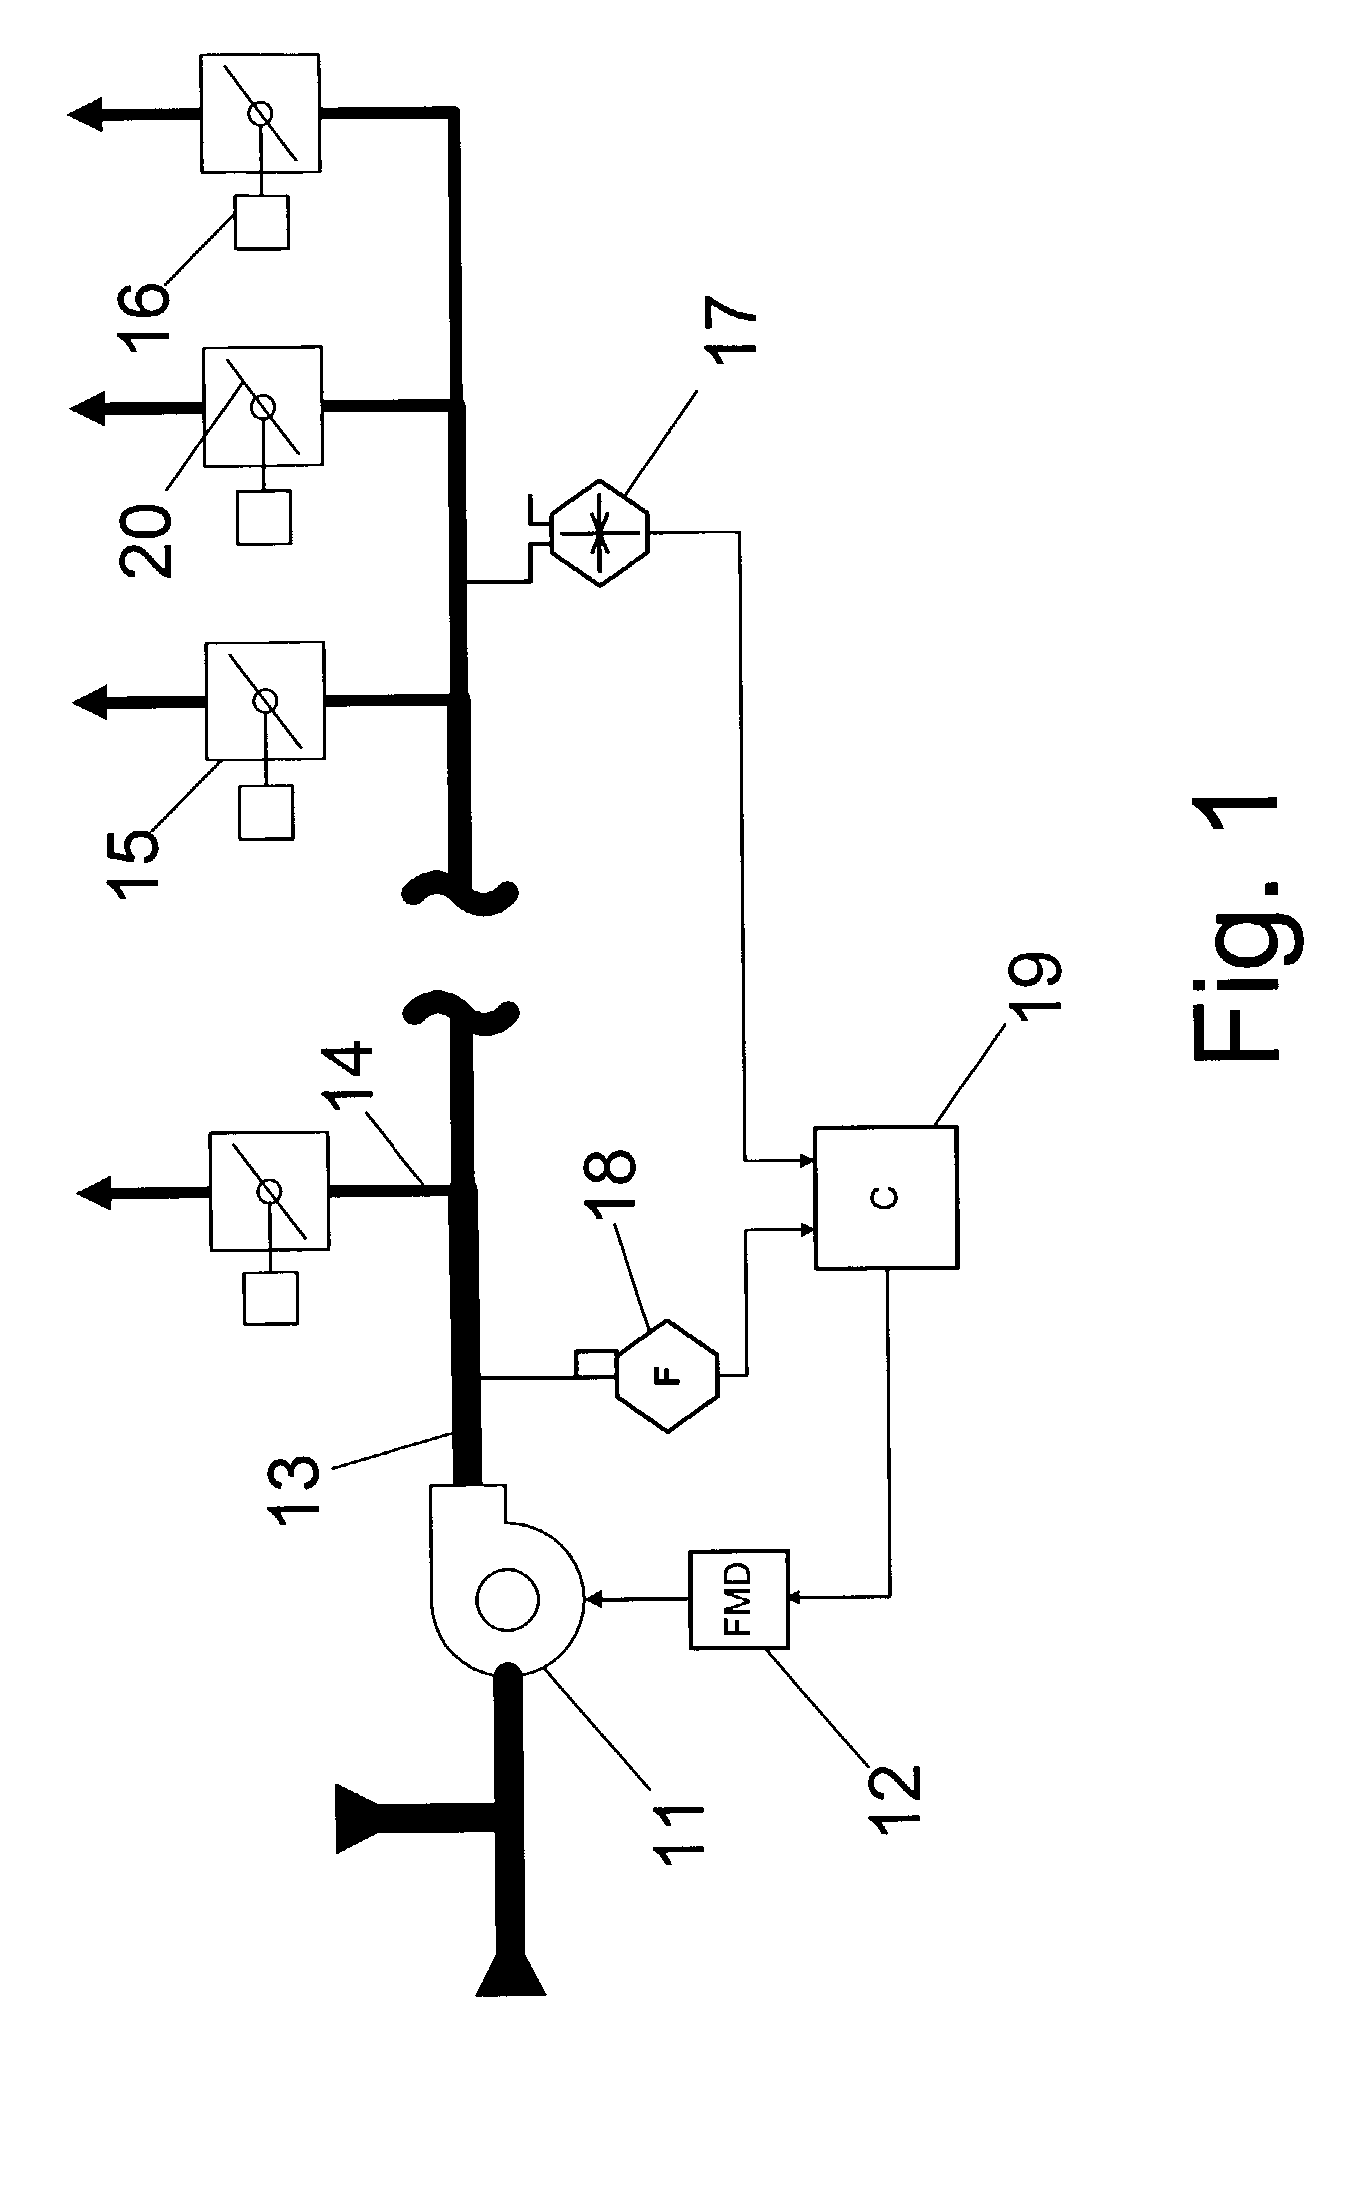 Method and apparatus for controlling variable air volume supply fans in heating, ventilating, and air-conditioning systems